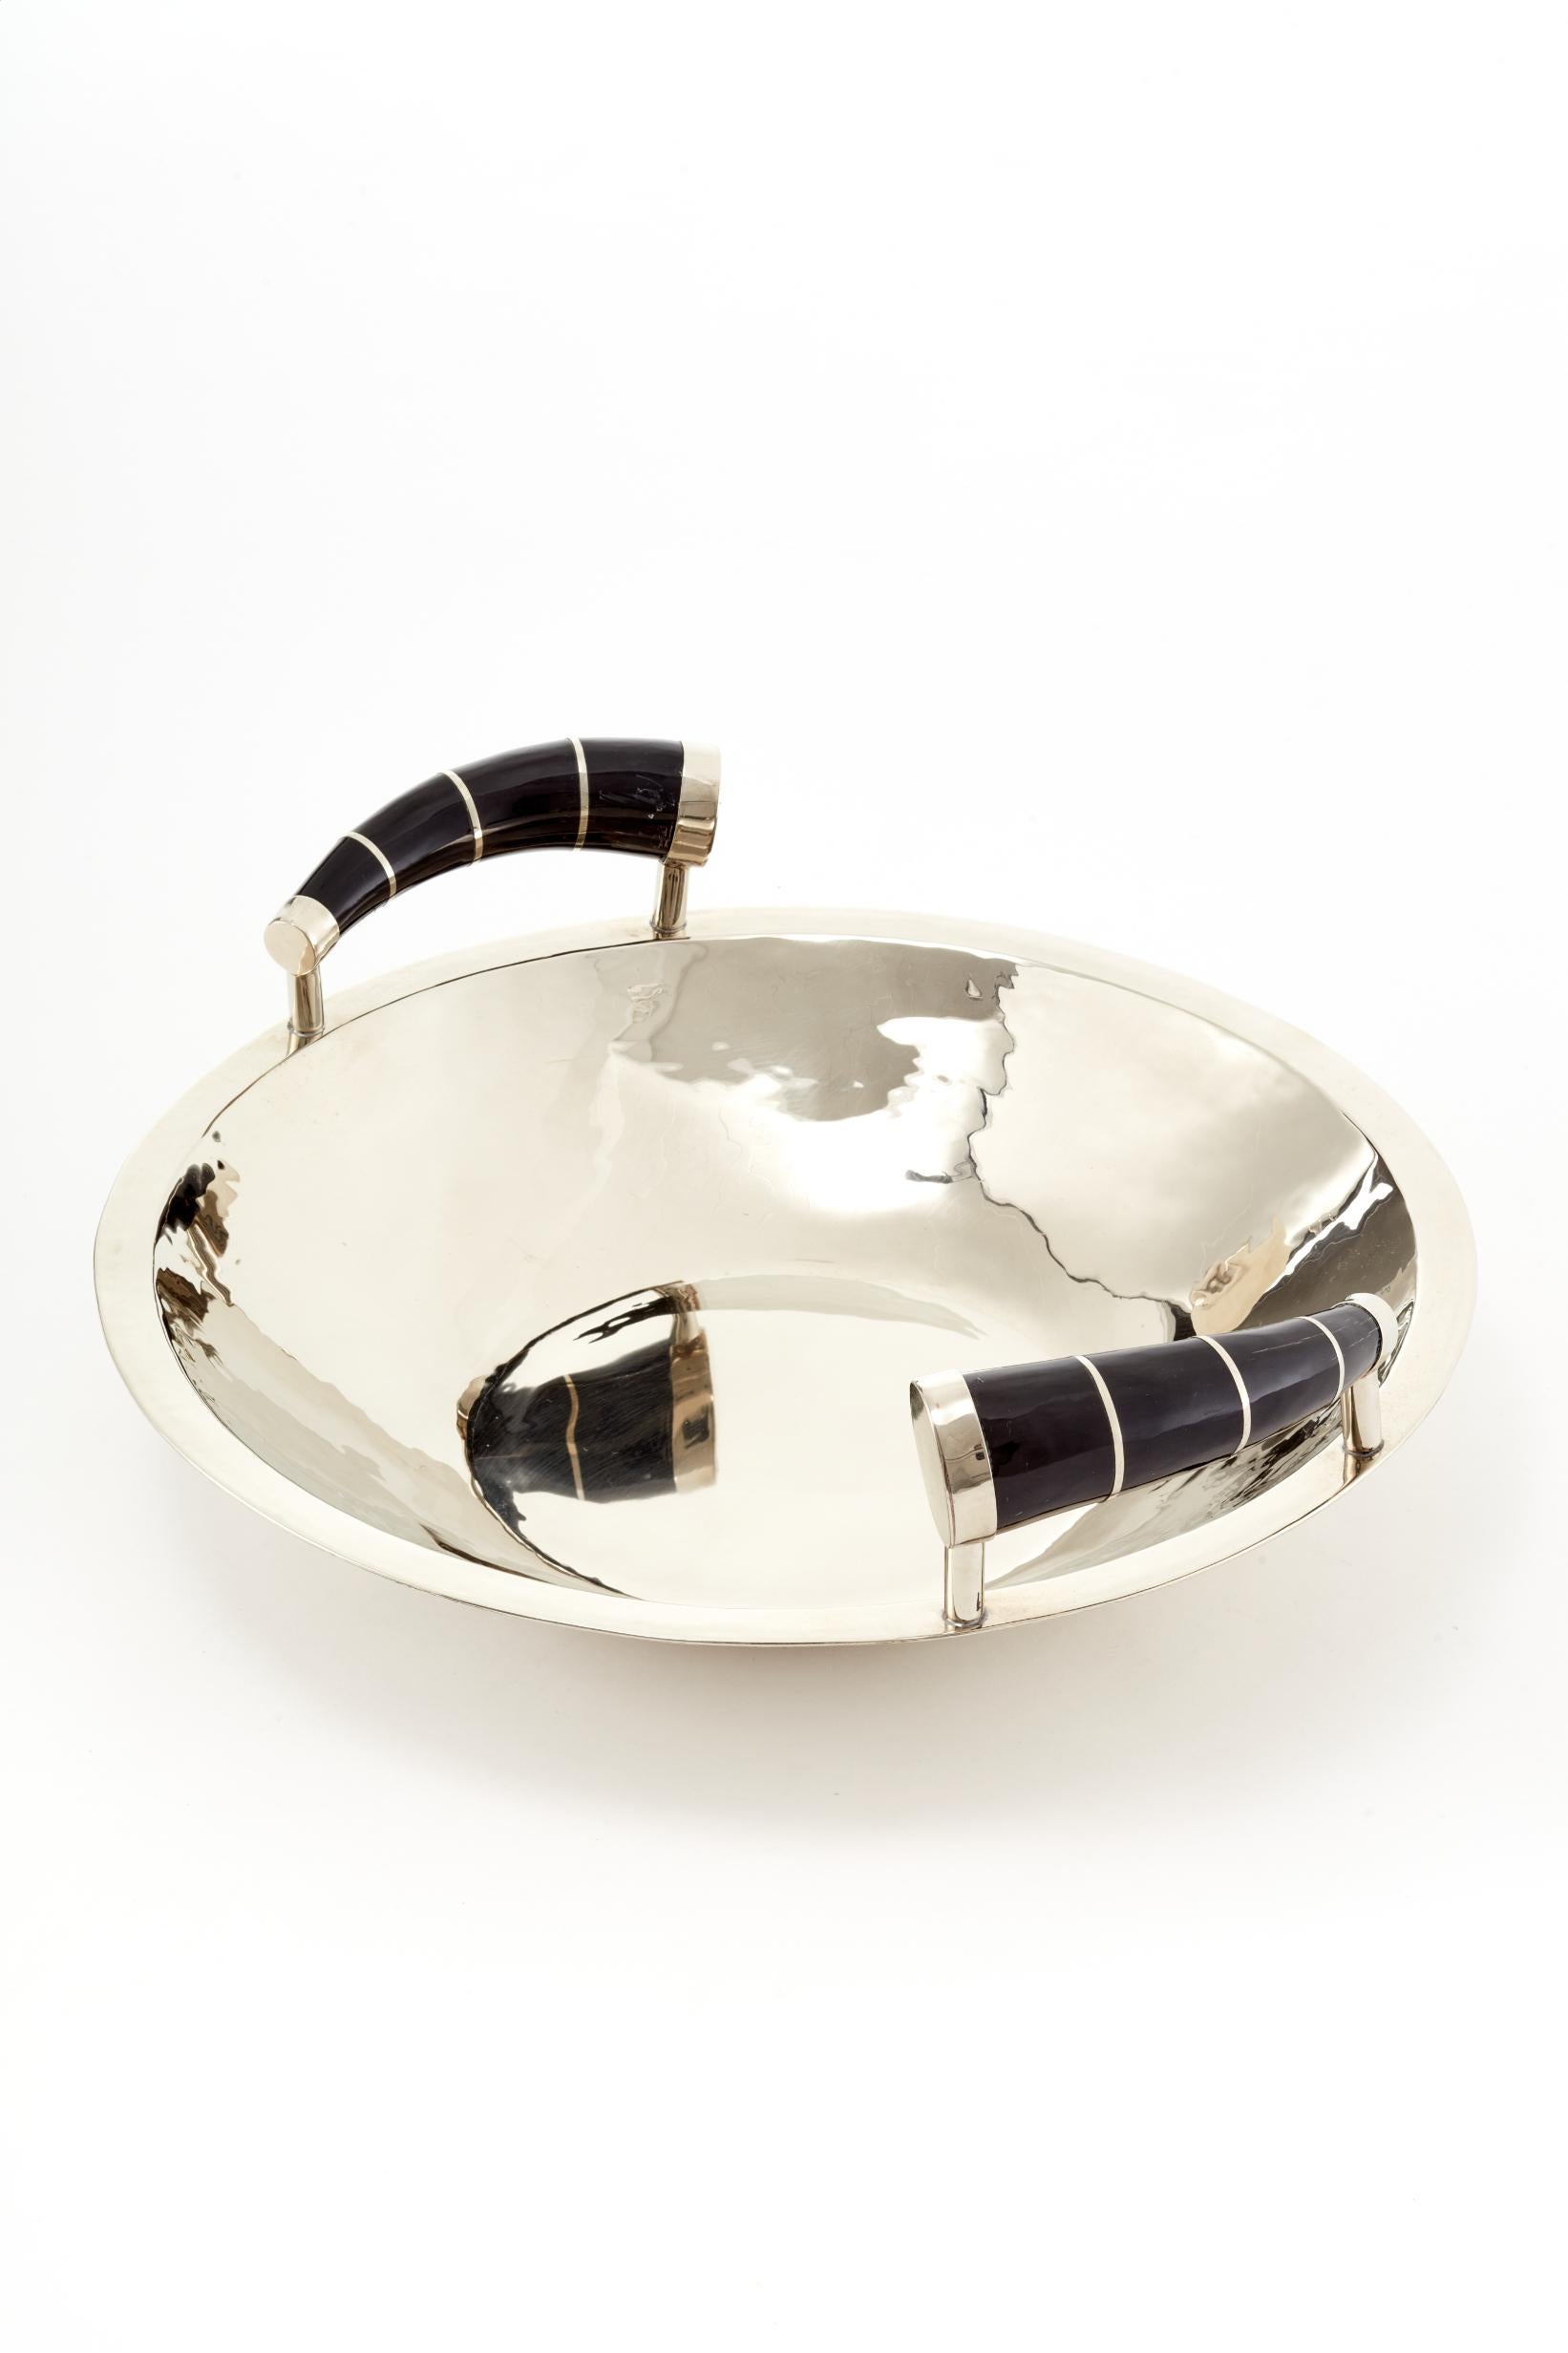 Chubut Large Bowl, Alpaca Silver & Black Horn In New Condition For Sale In Buenos Aires, AR